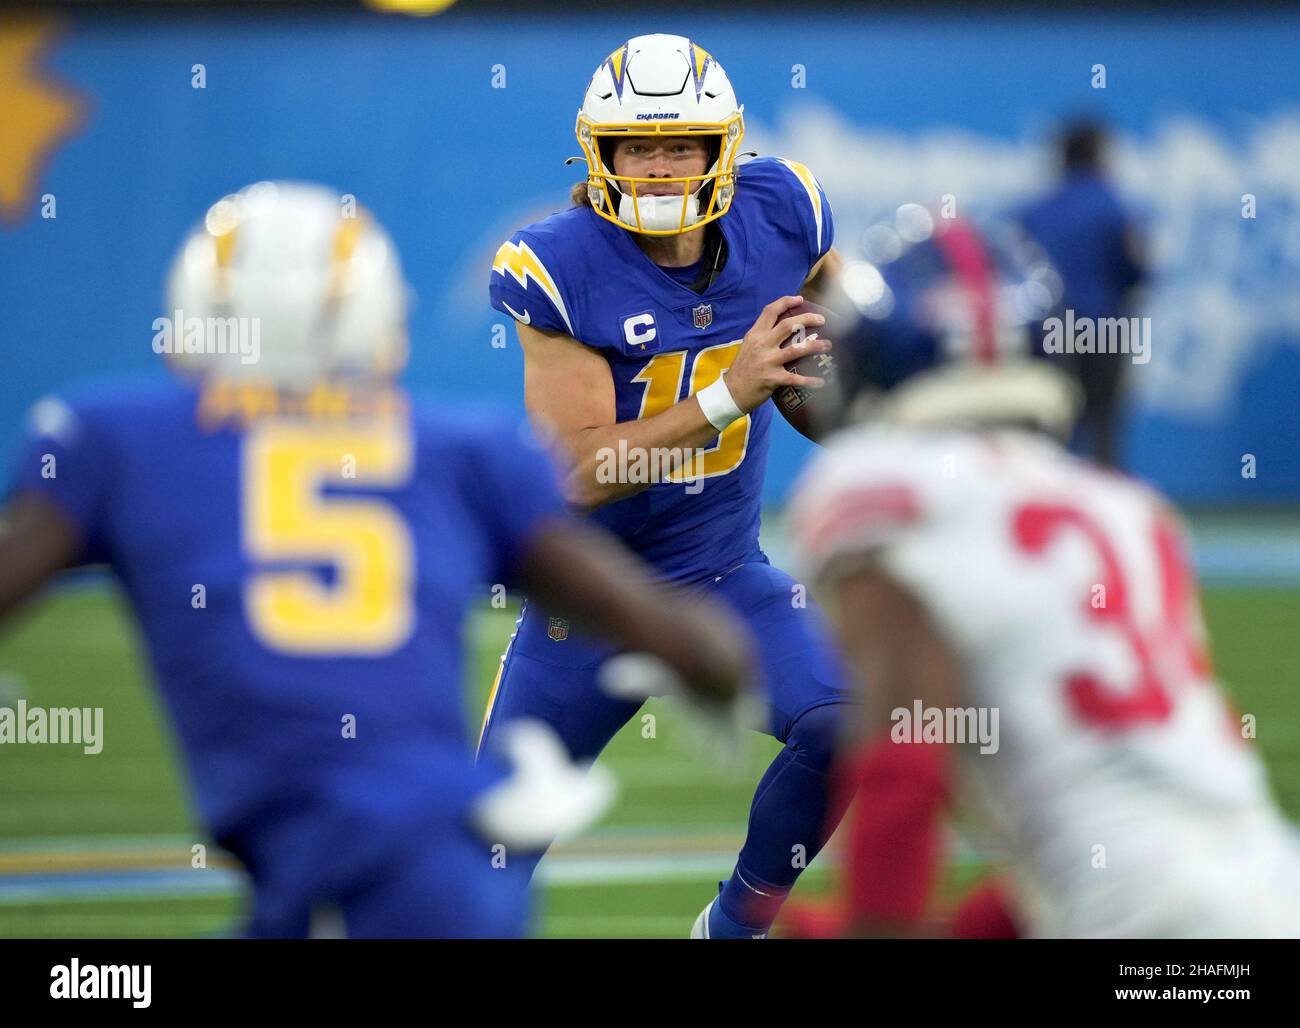 Los Angeles Chargers quarterback Justin Herbert runs for six yards in third quarter action against the New York Giants at SoFi Stadium on Sunday, December 12, 2021 in Inglewood, California. The Chargers defeated the Giants 37-21. Photo by Jon SooHoo/UPI Stock Photo